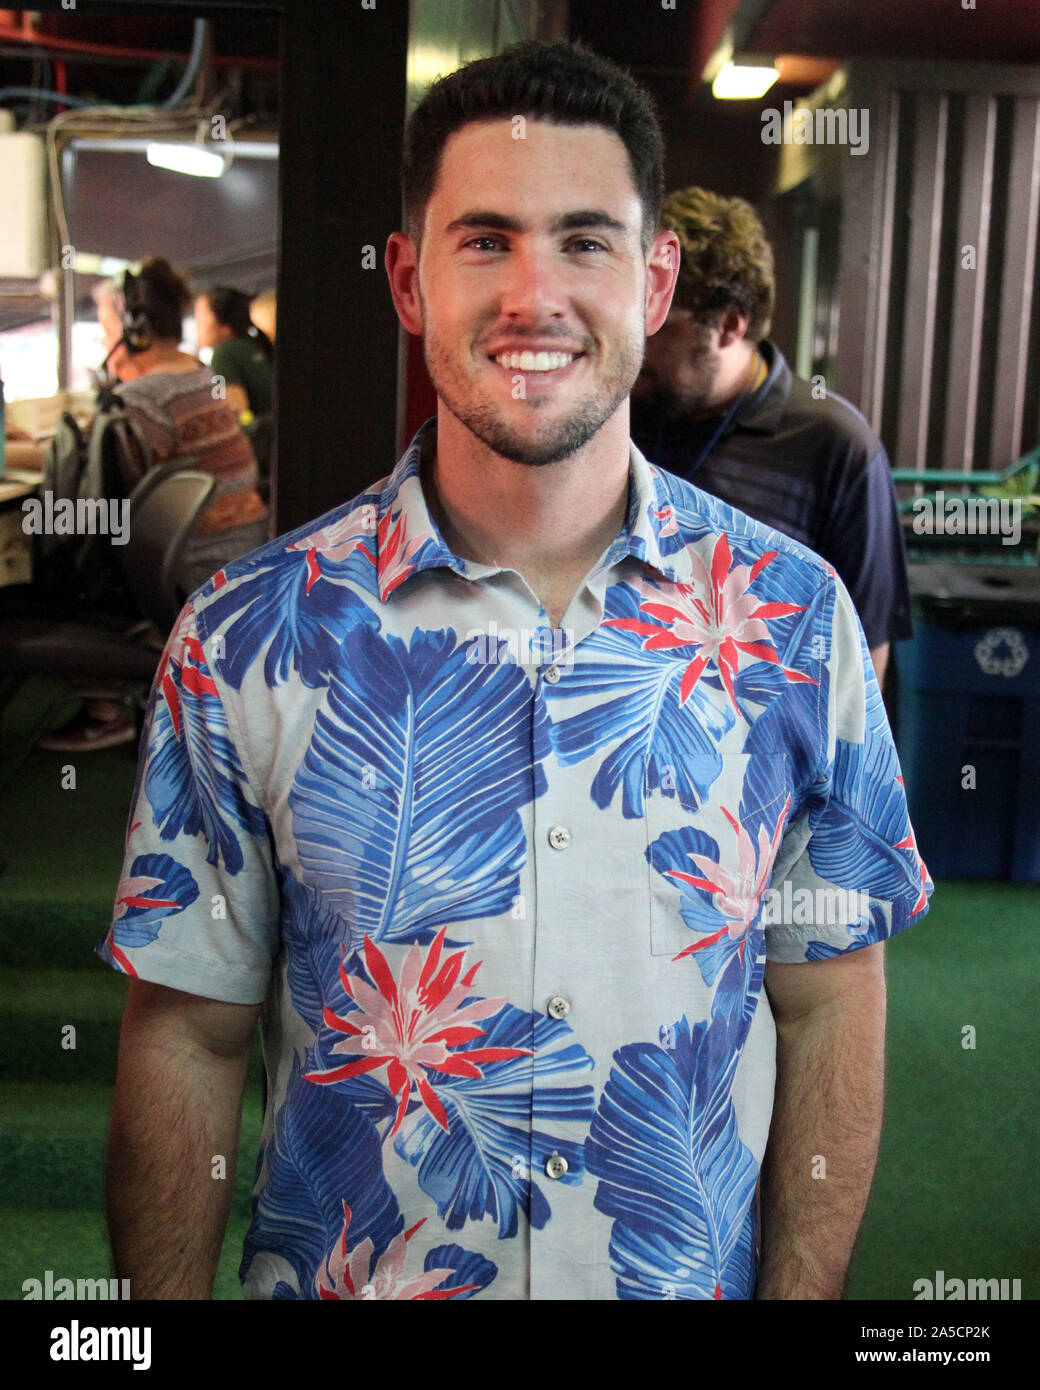 October 19, 2019 - CBS announcer Aaron Murray, the former Georgia and AAF quarterback was allocated to the Tampa Bay Vipers of the XFL this week, gets ready to broadcast a game between the Air Force Academy Falcons and the Hawaii Rainbow Warriors at Aloha Stadium in Honolulu, HI - Michael Sullivan/CSM. Stock Photo